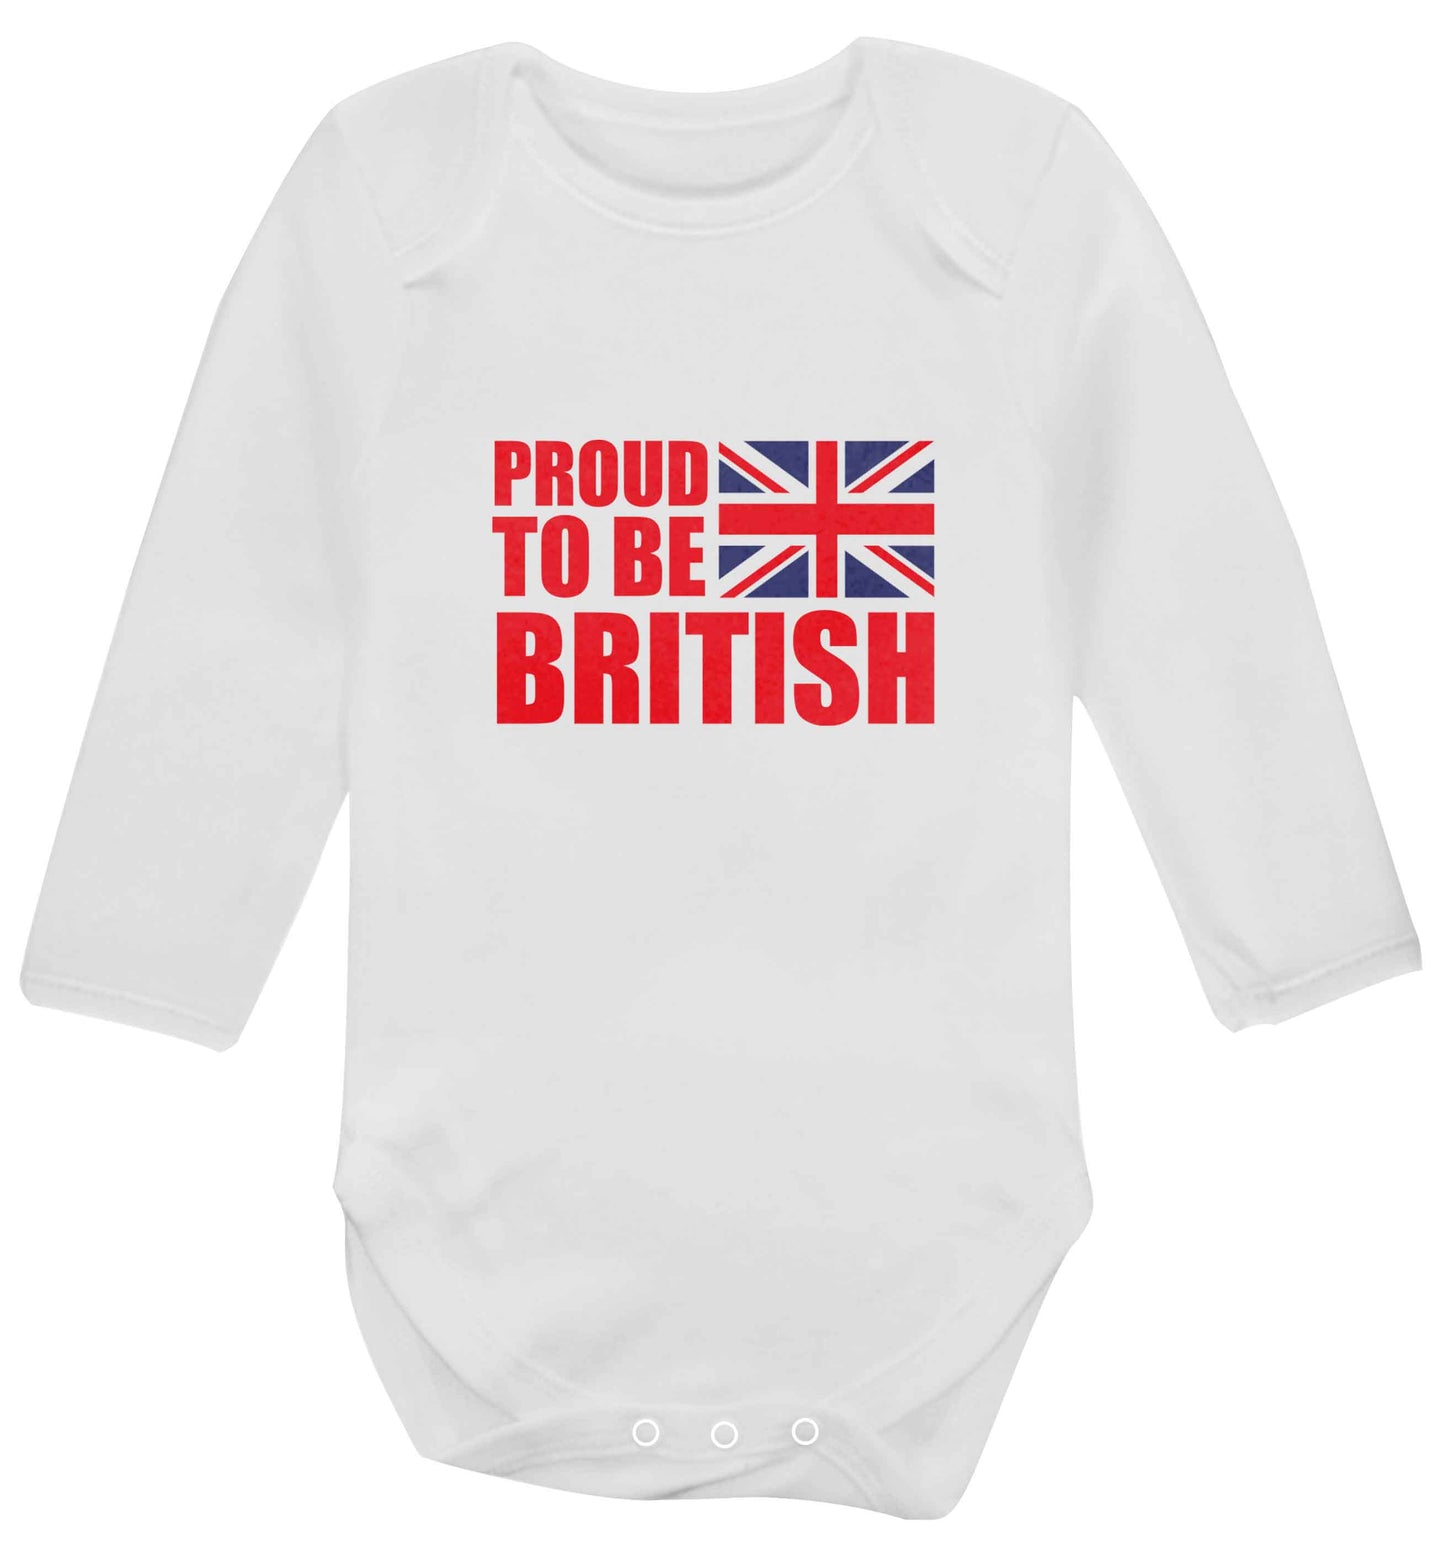 Proud to be British baby vest long sleeved white 6-12 months